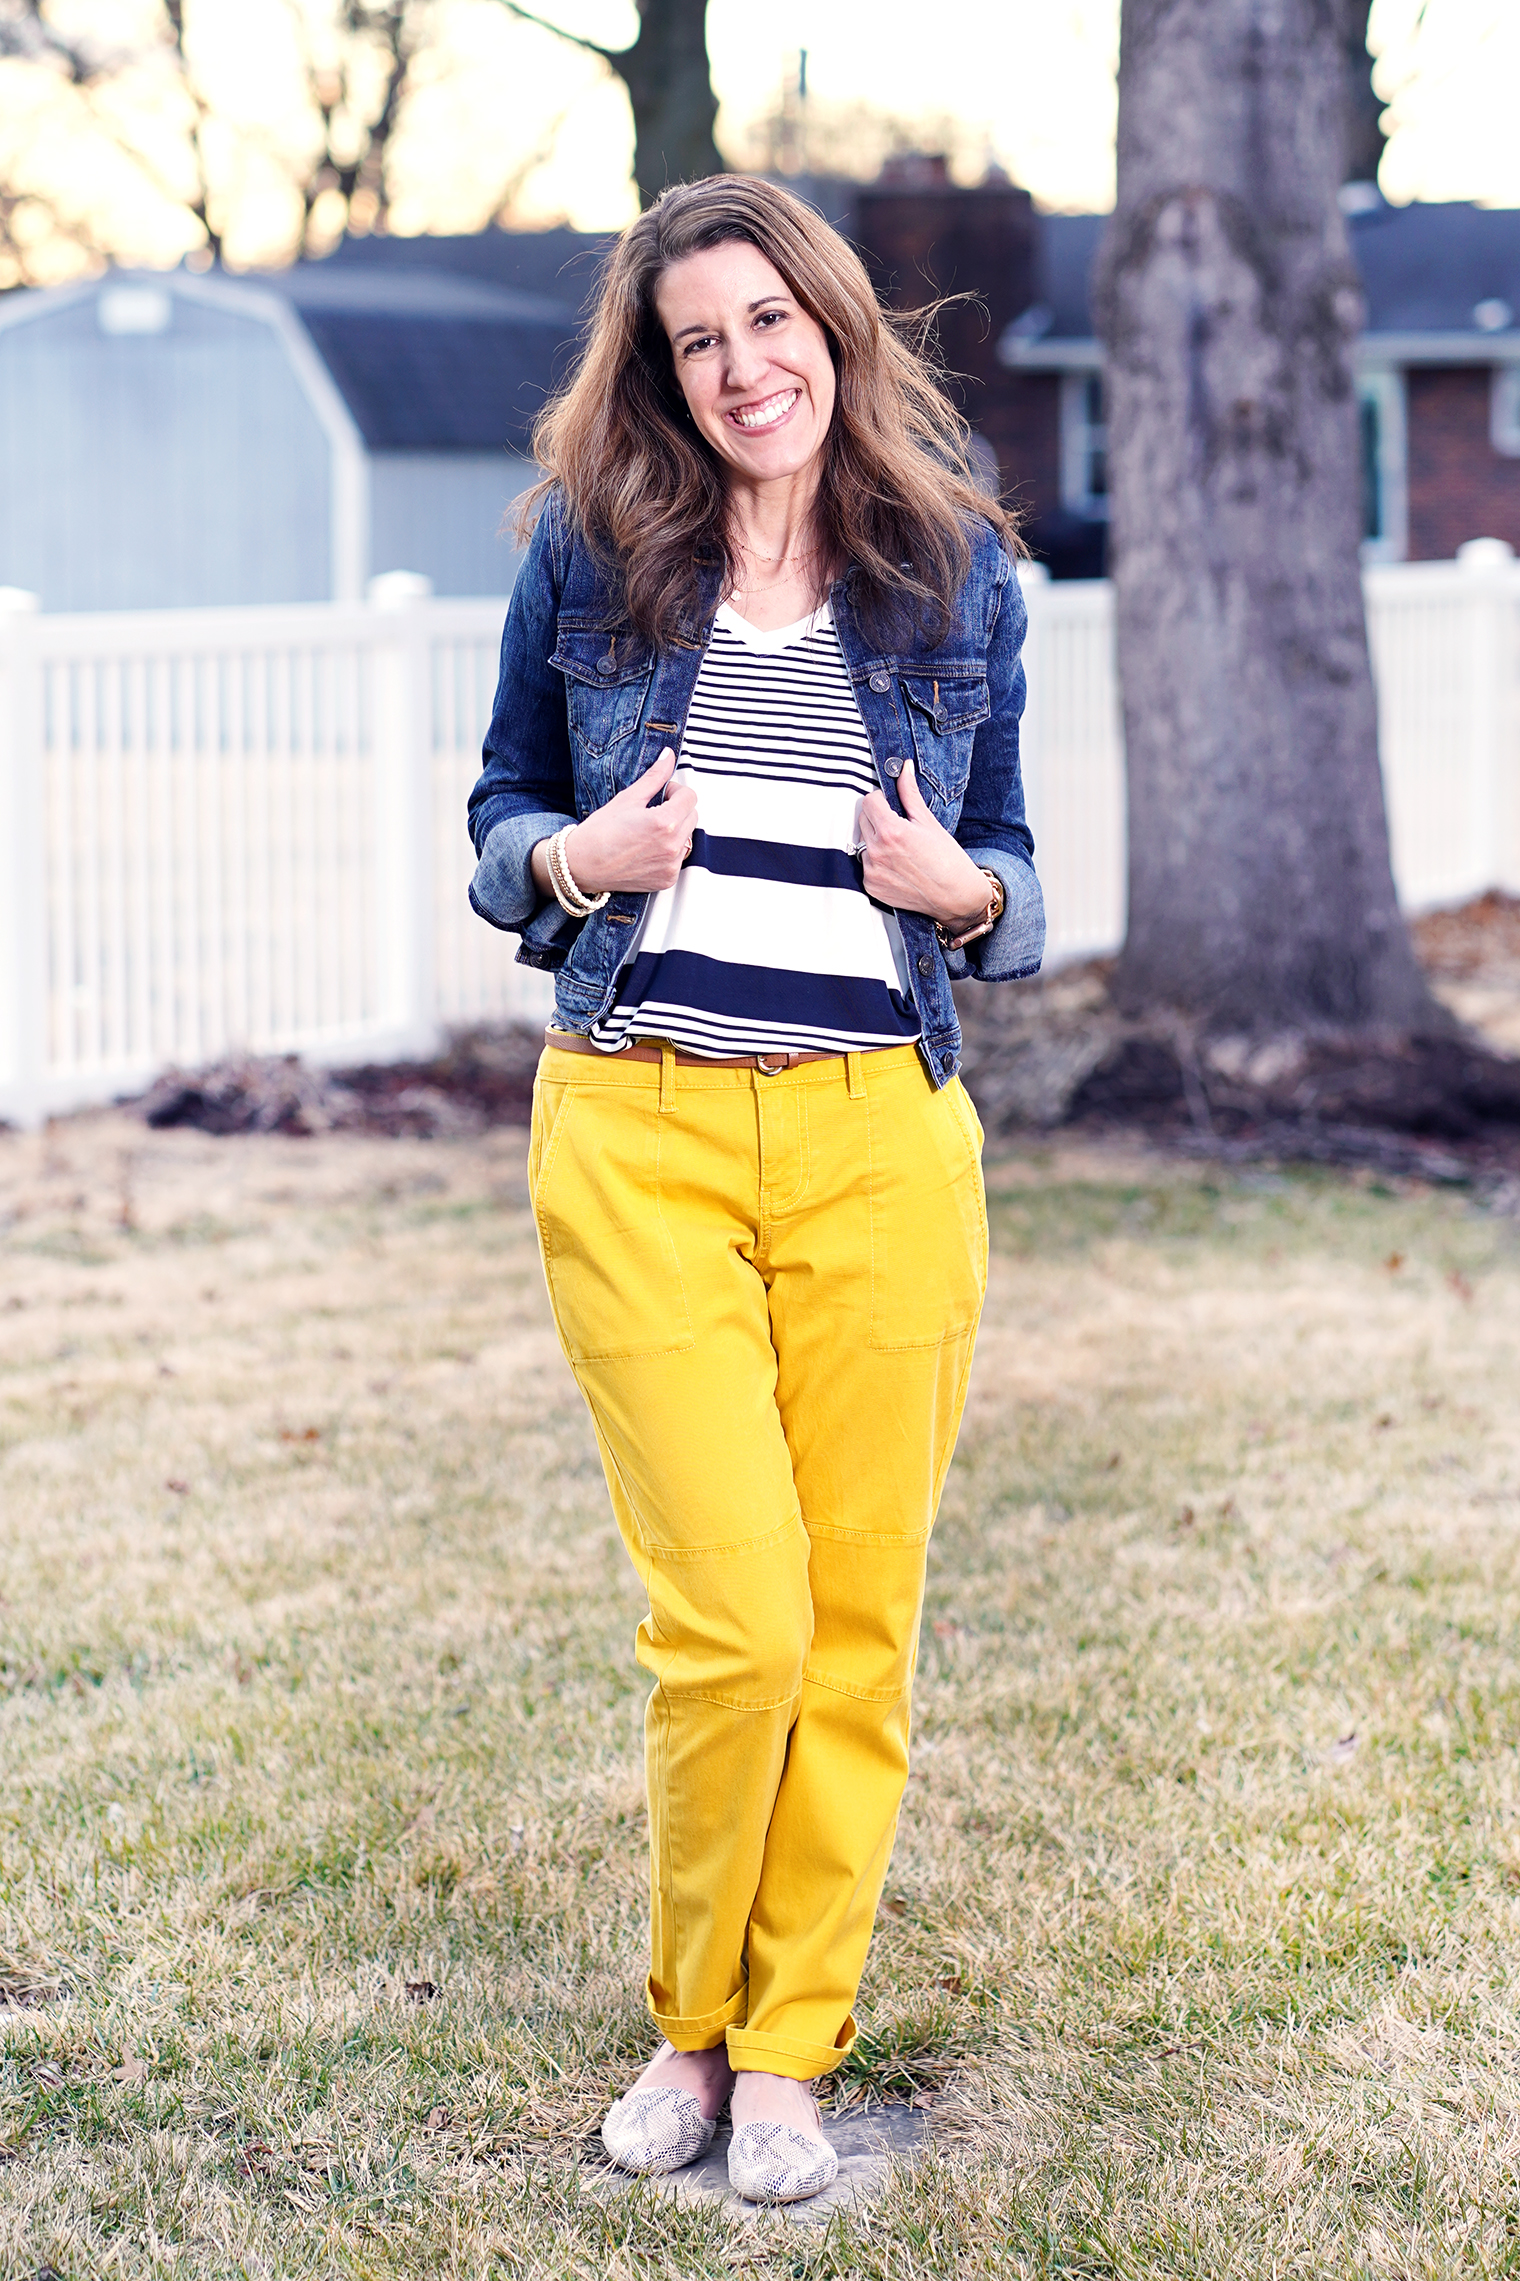 Thursday Fashion Files Link Up #294 – Colored Pants for the Win in